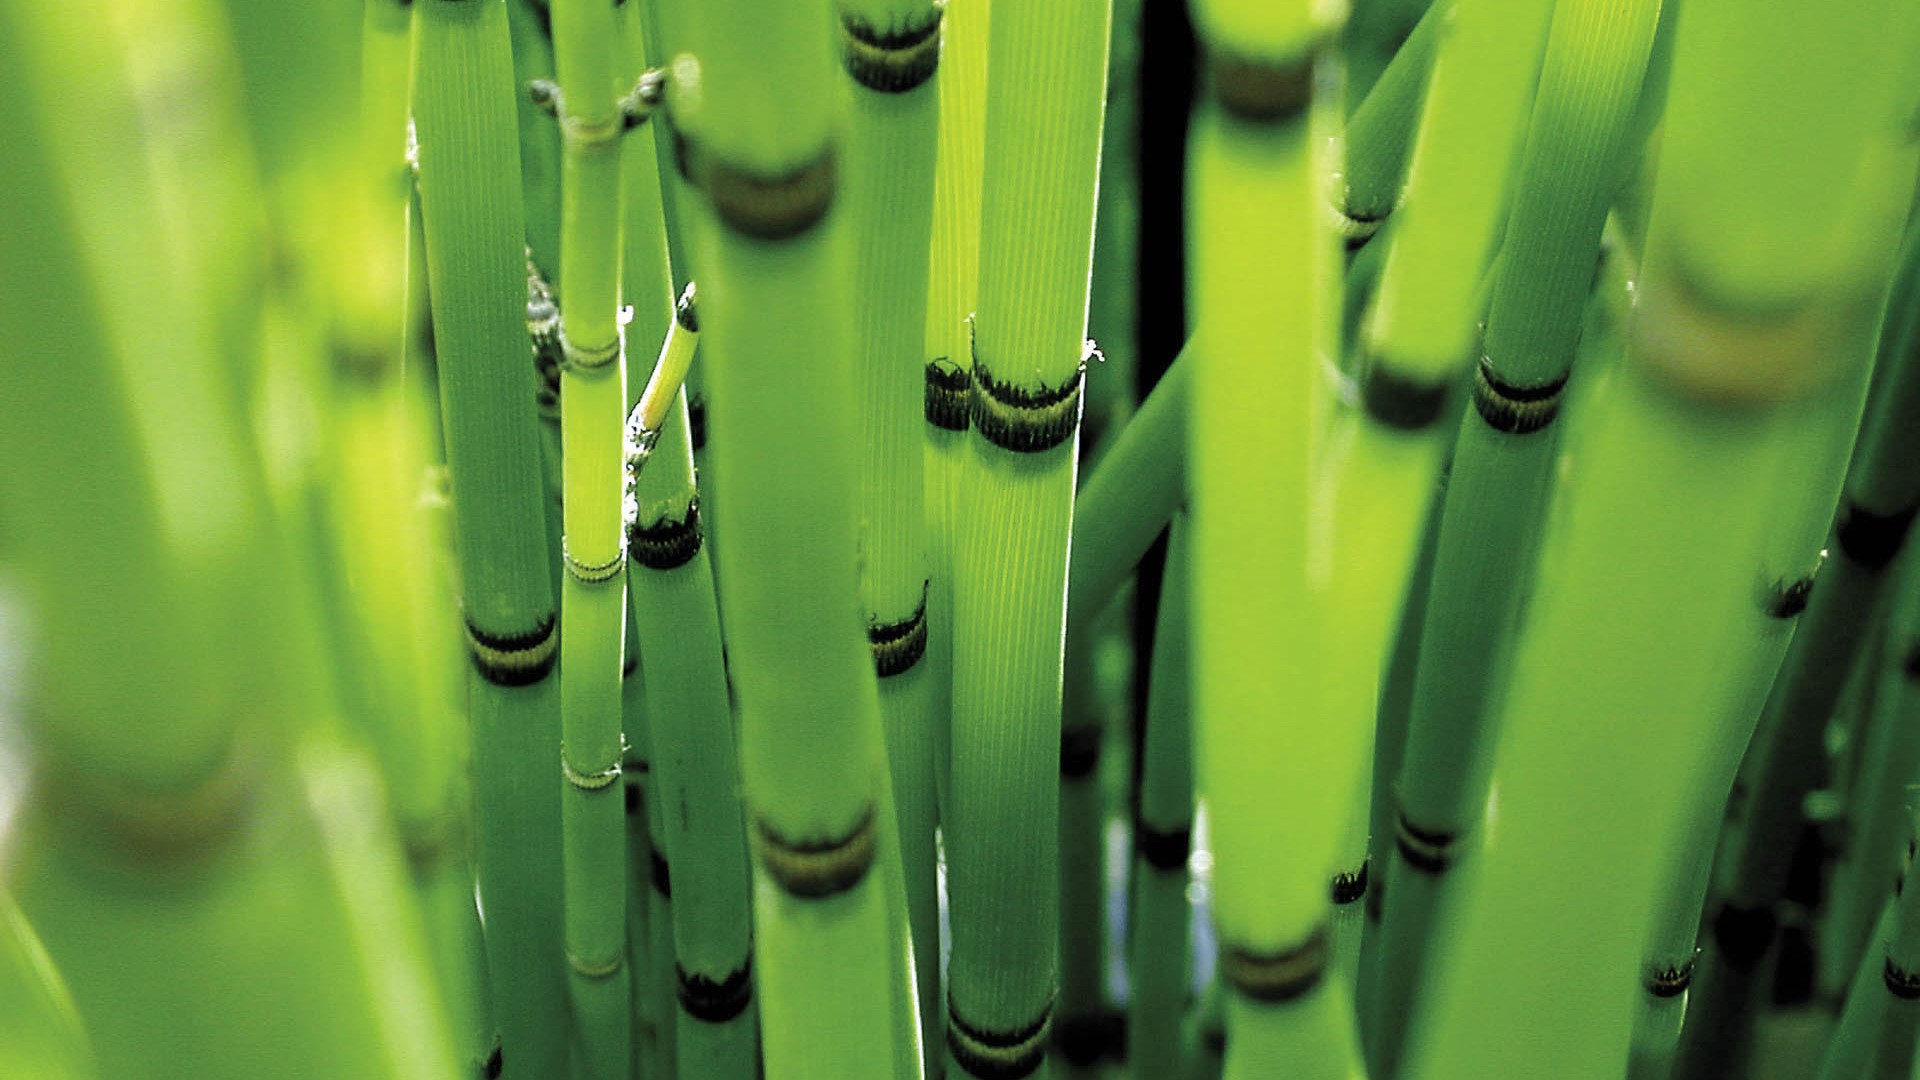 General 1920x1080 nature reeds green depth of field bamboo plants